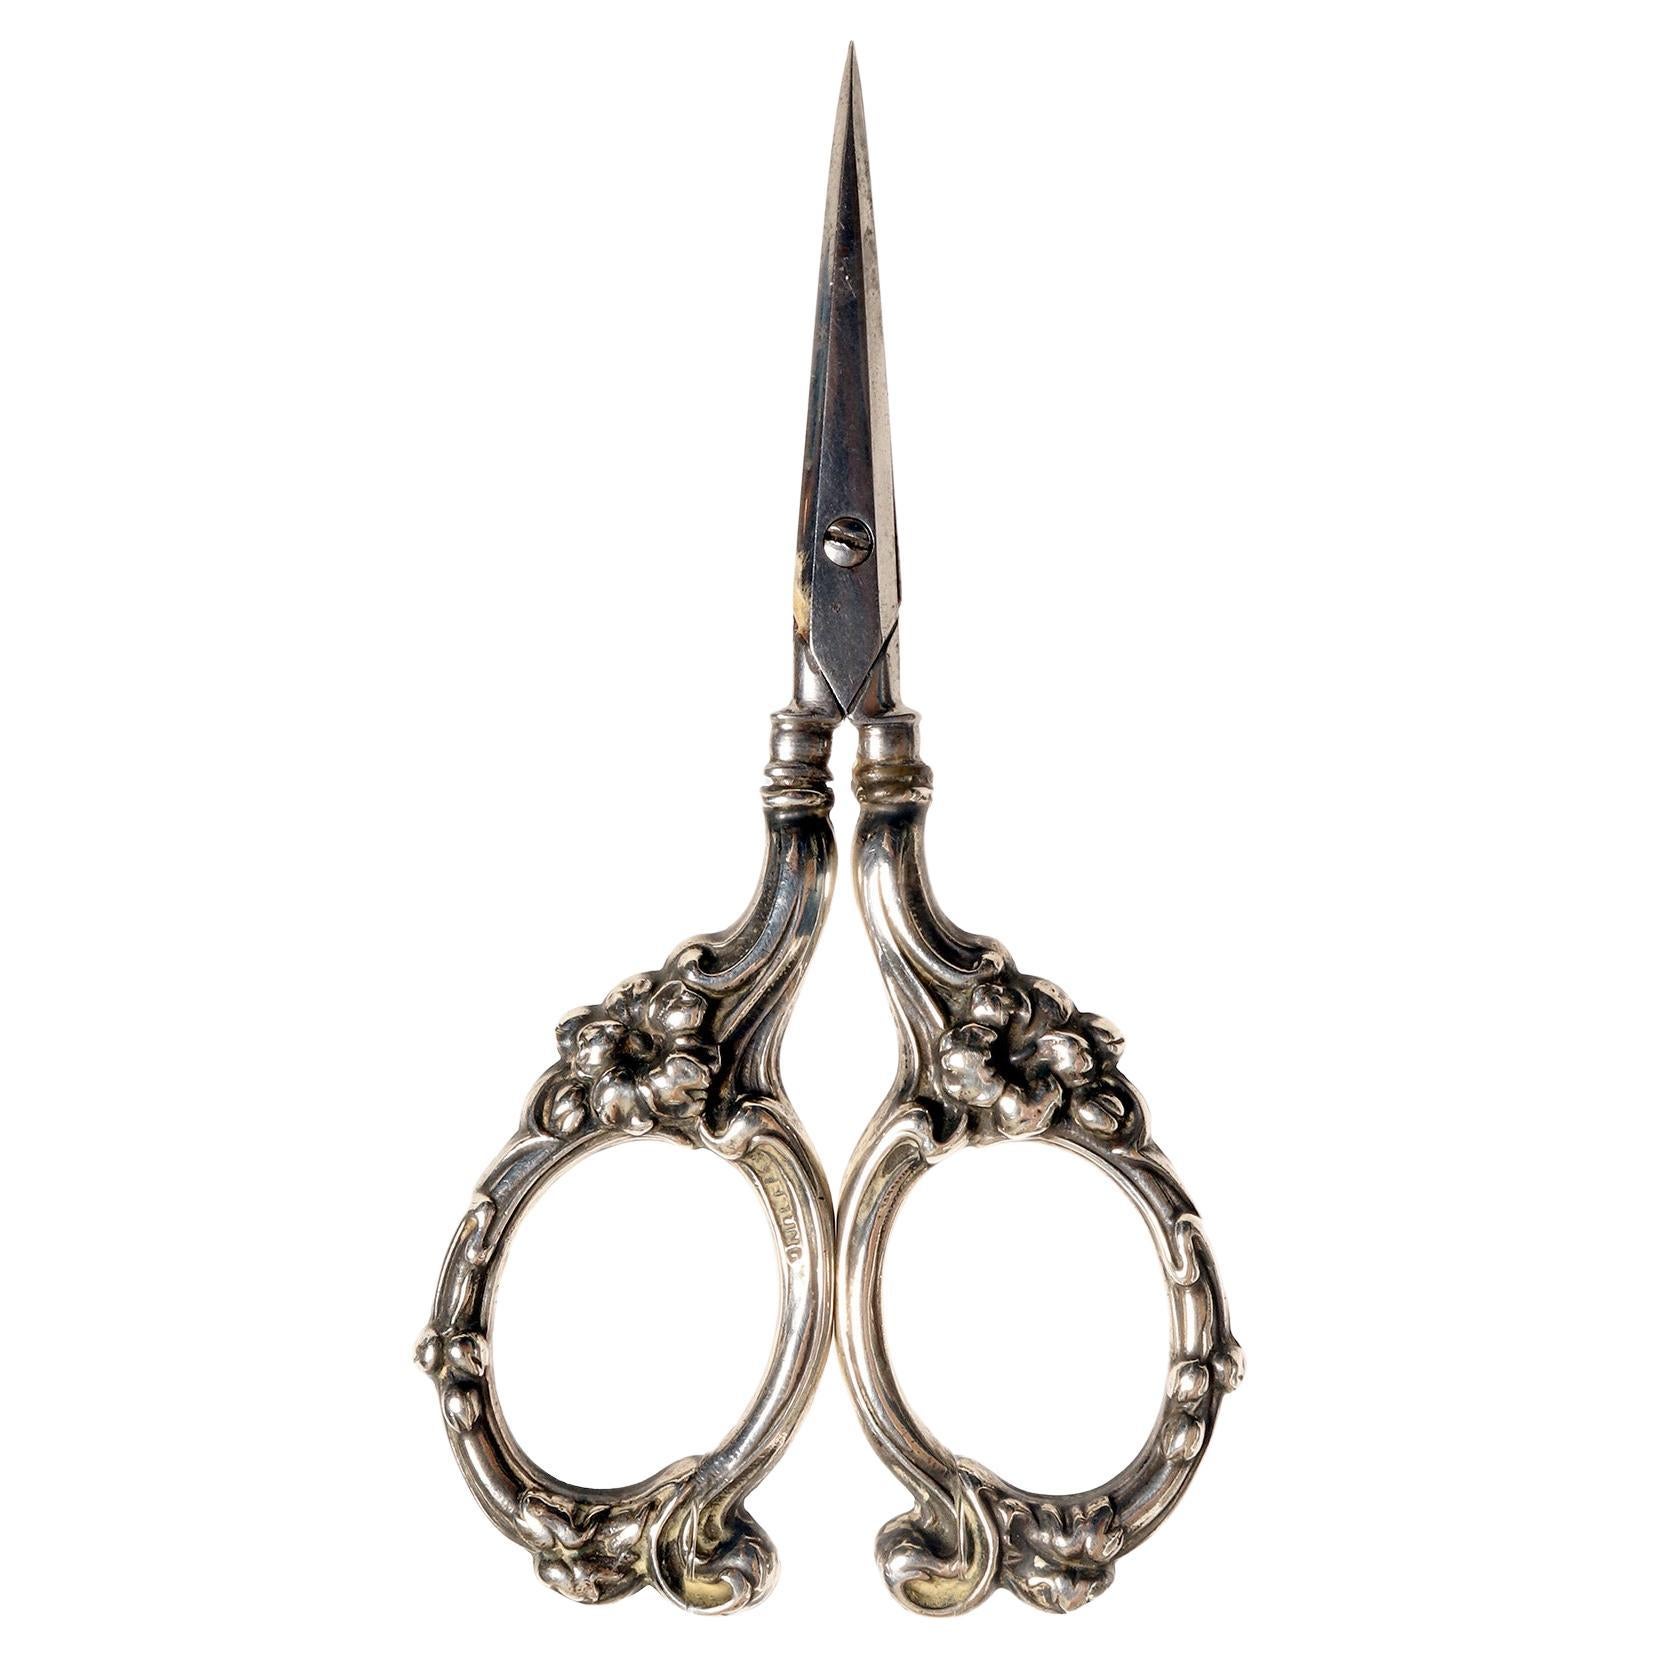 Sterling Silver Scissors to Cut the Stems of the Bunches of Grapes, USA, 1900